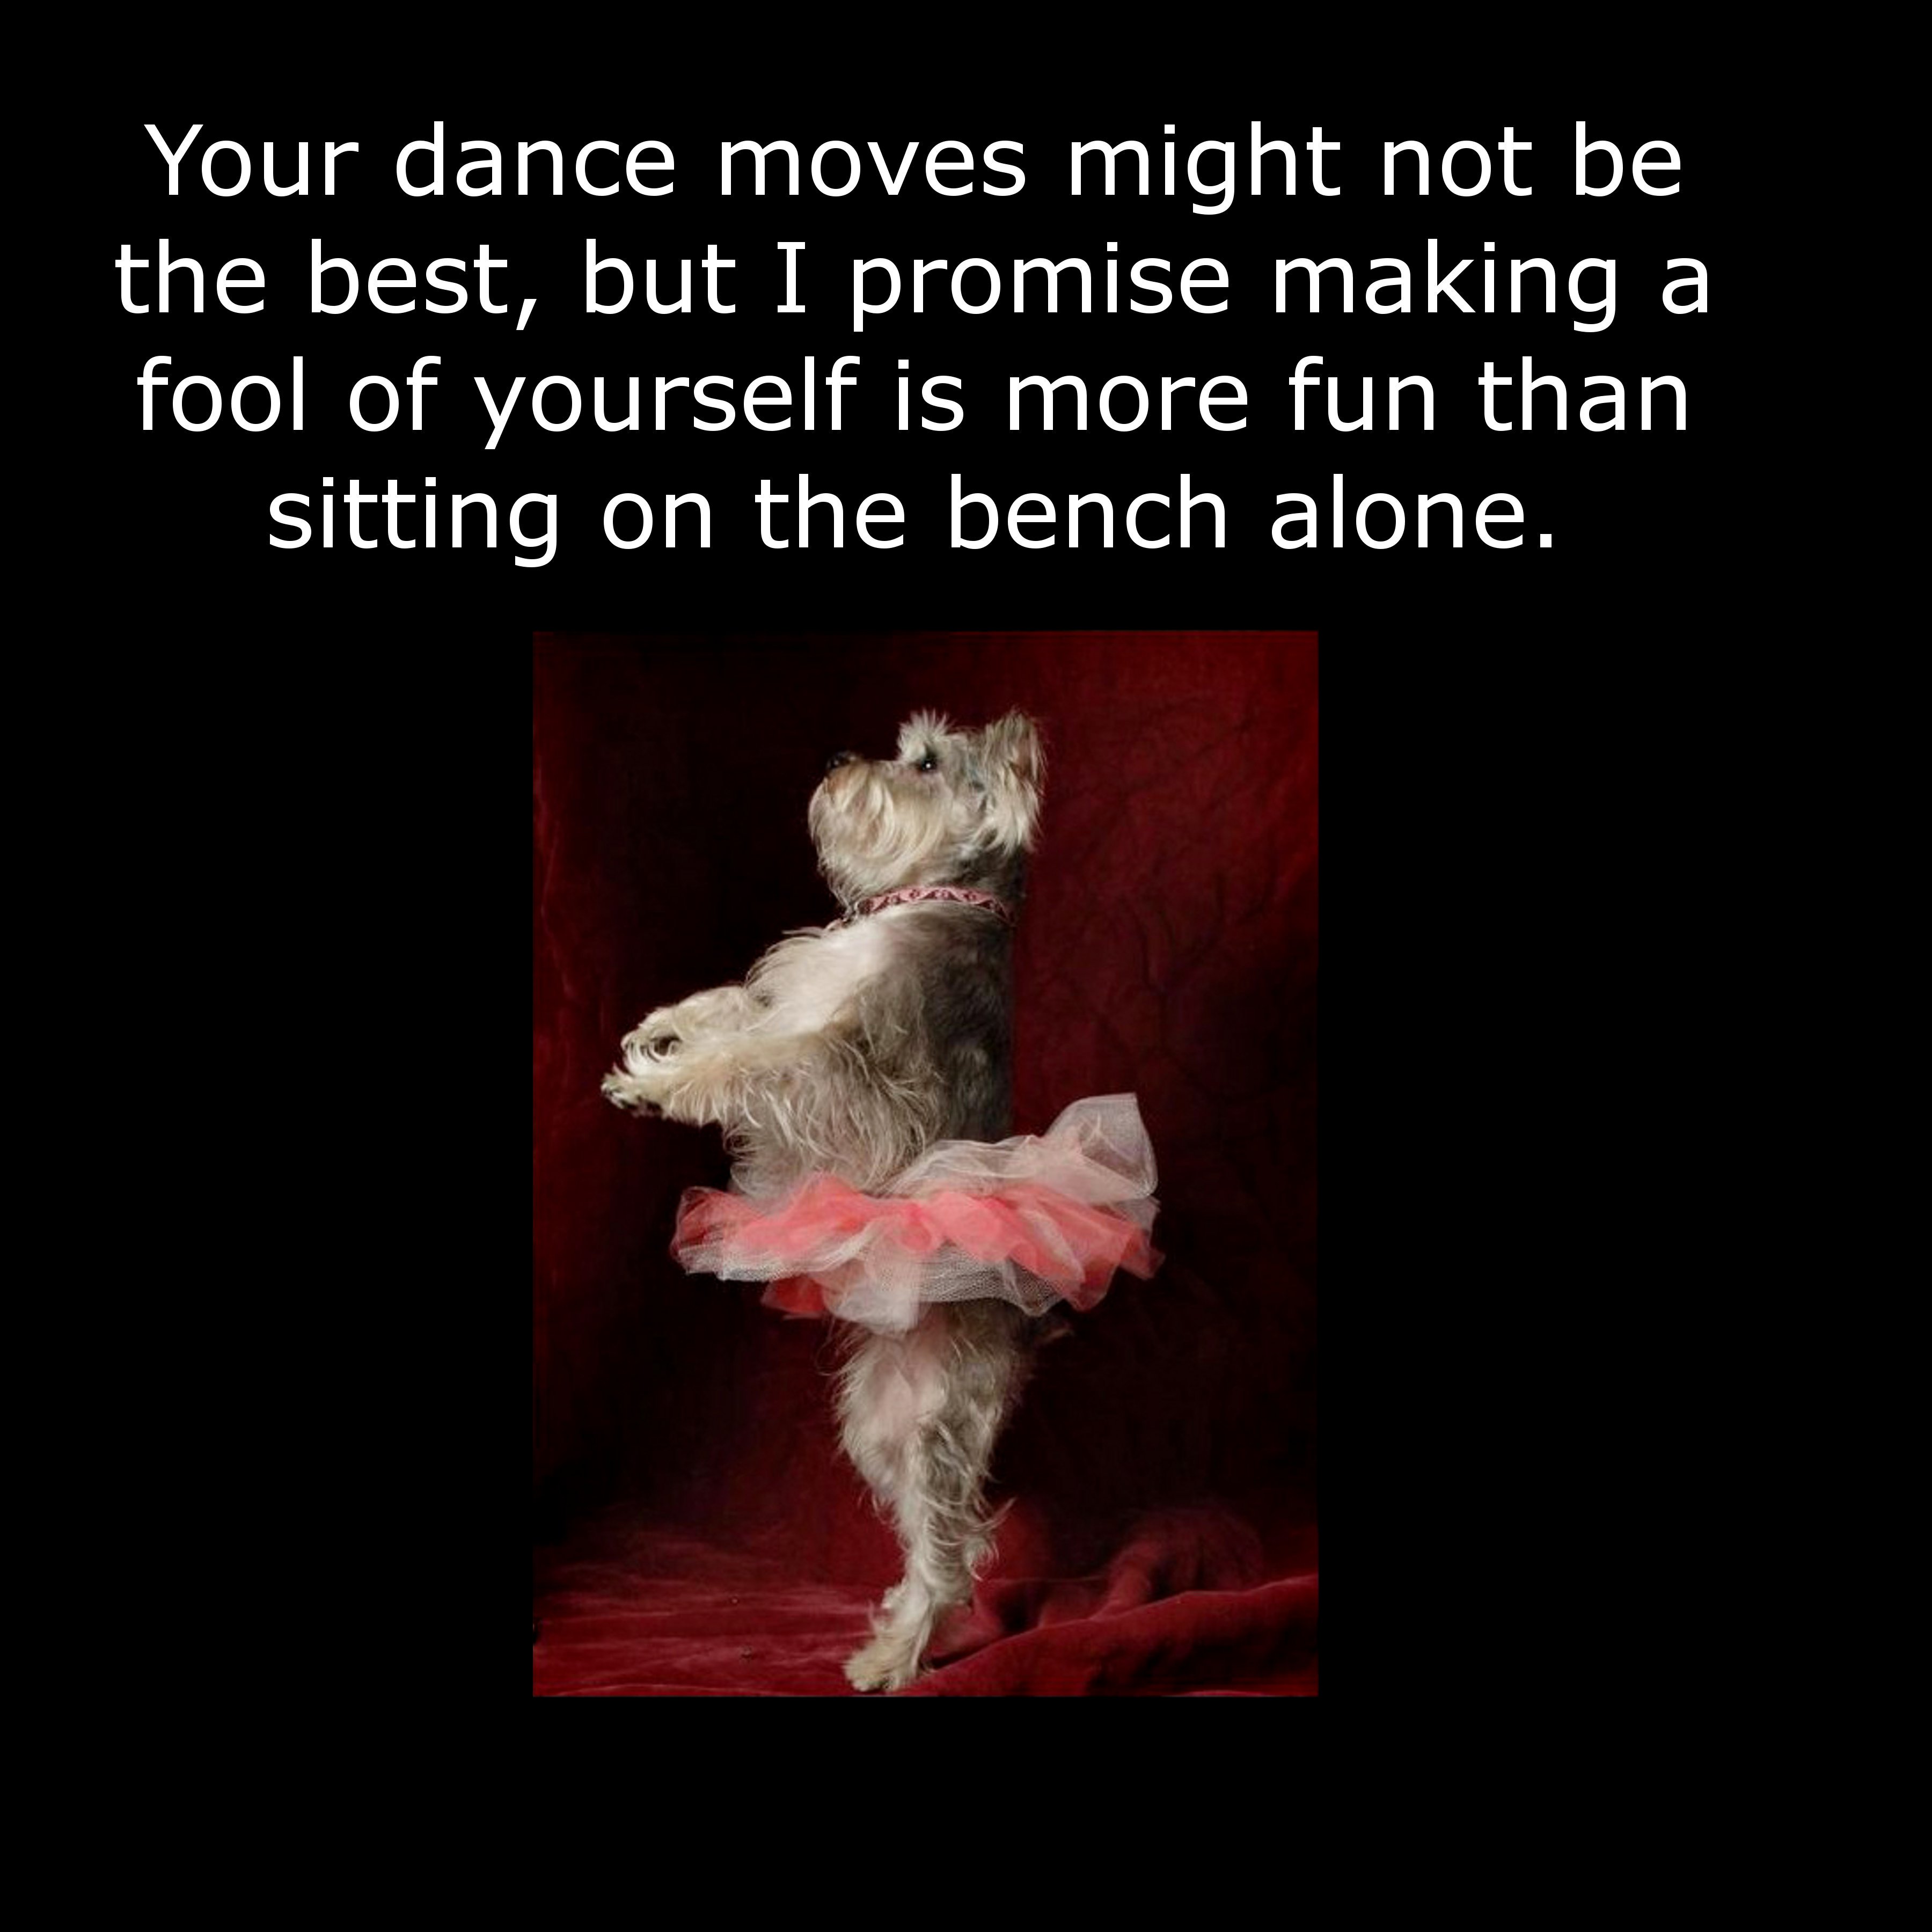 Good advice and funny animals